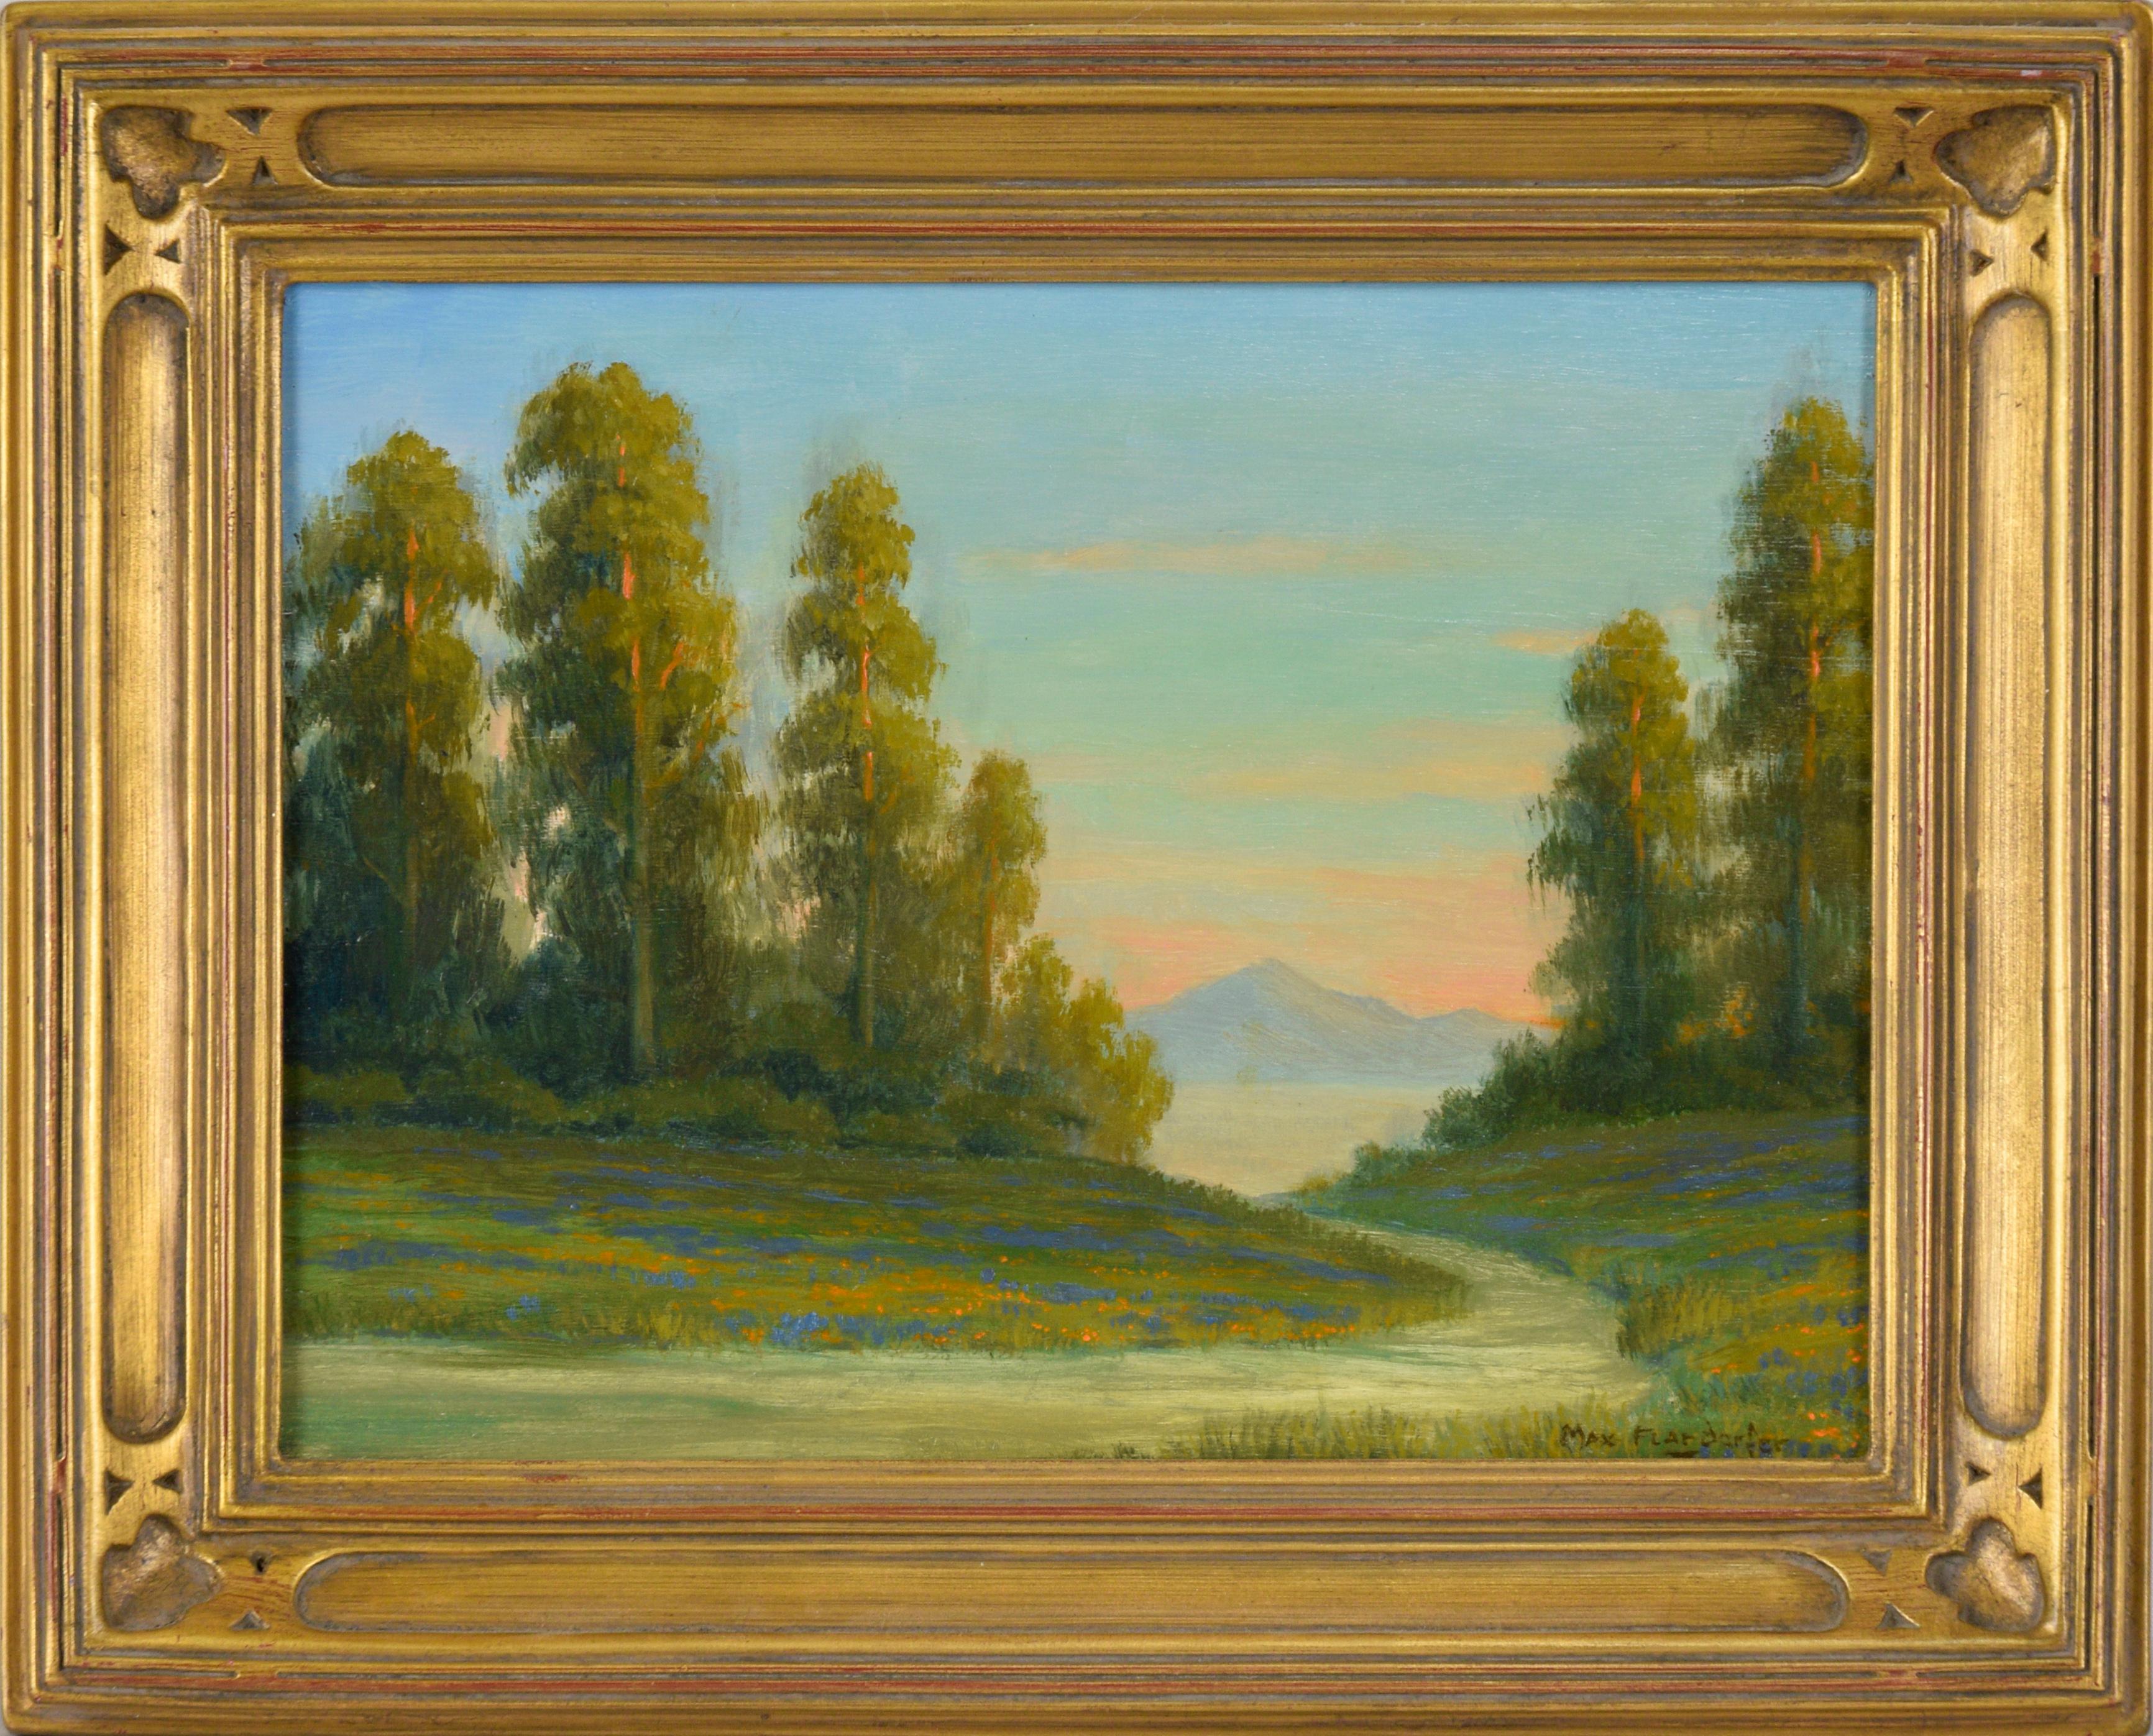 Max Flandorfer Landscape Painting - "California Lupines" Landscape in Oil on Wood Panel